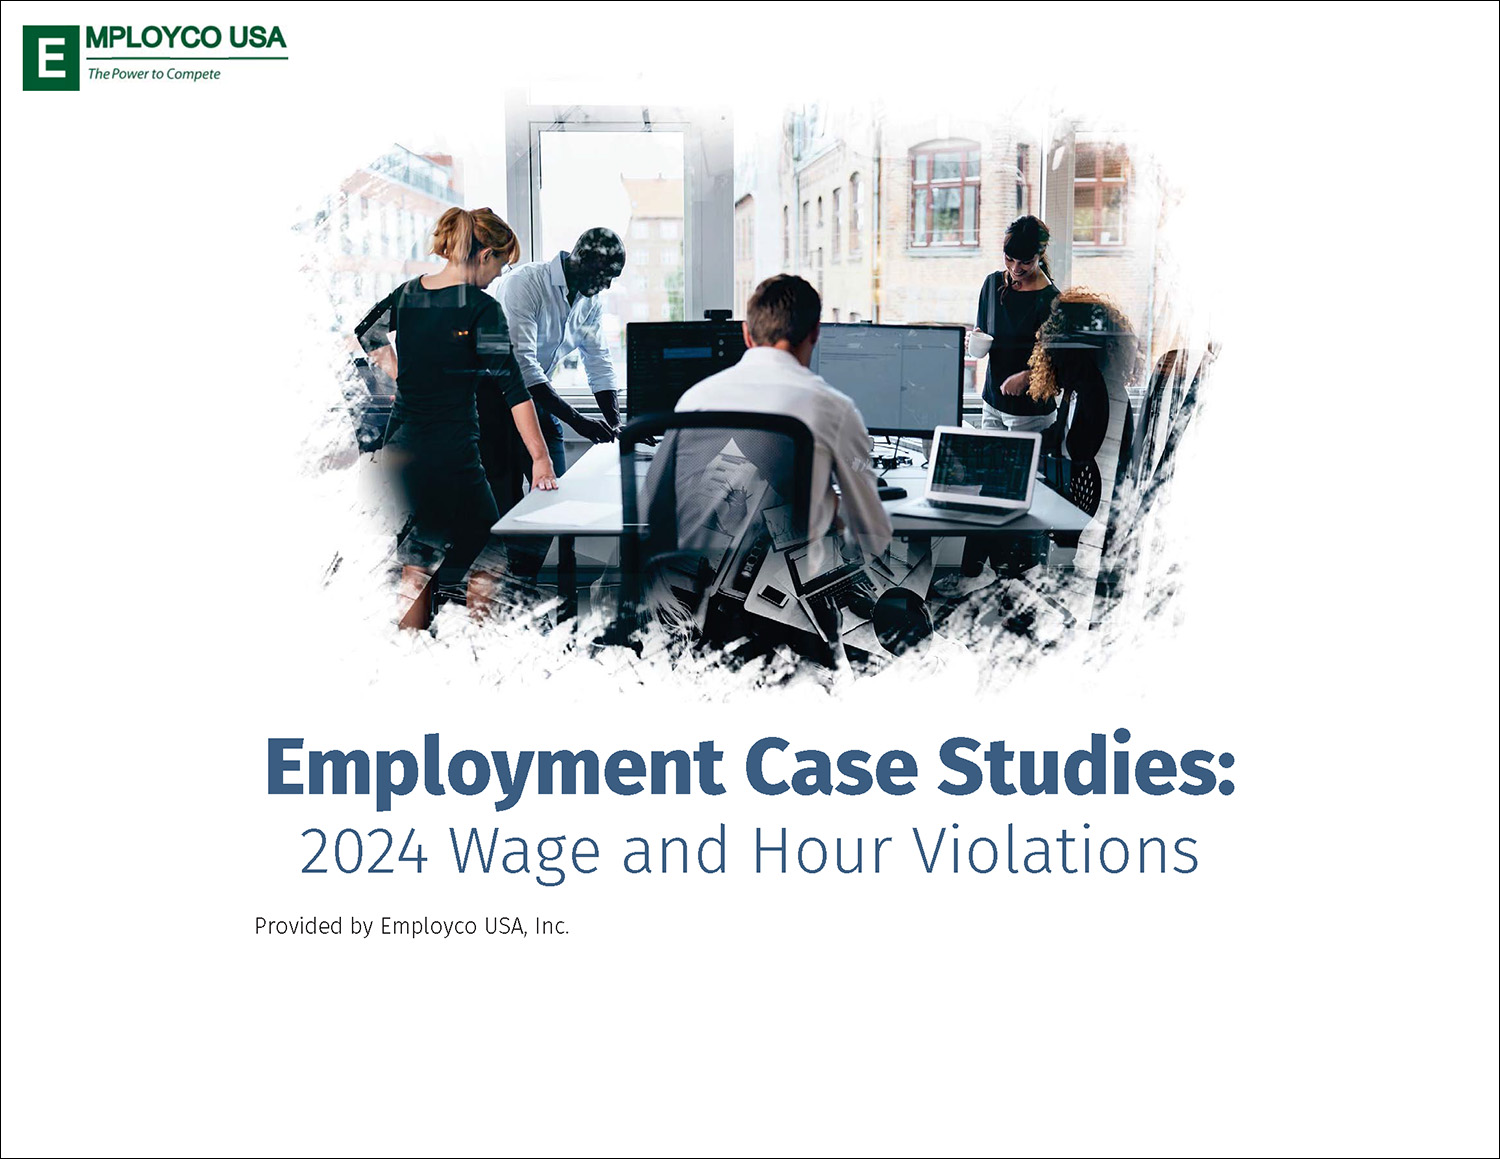 Employment Case Studies: 2024 Wage and Hour Violations